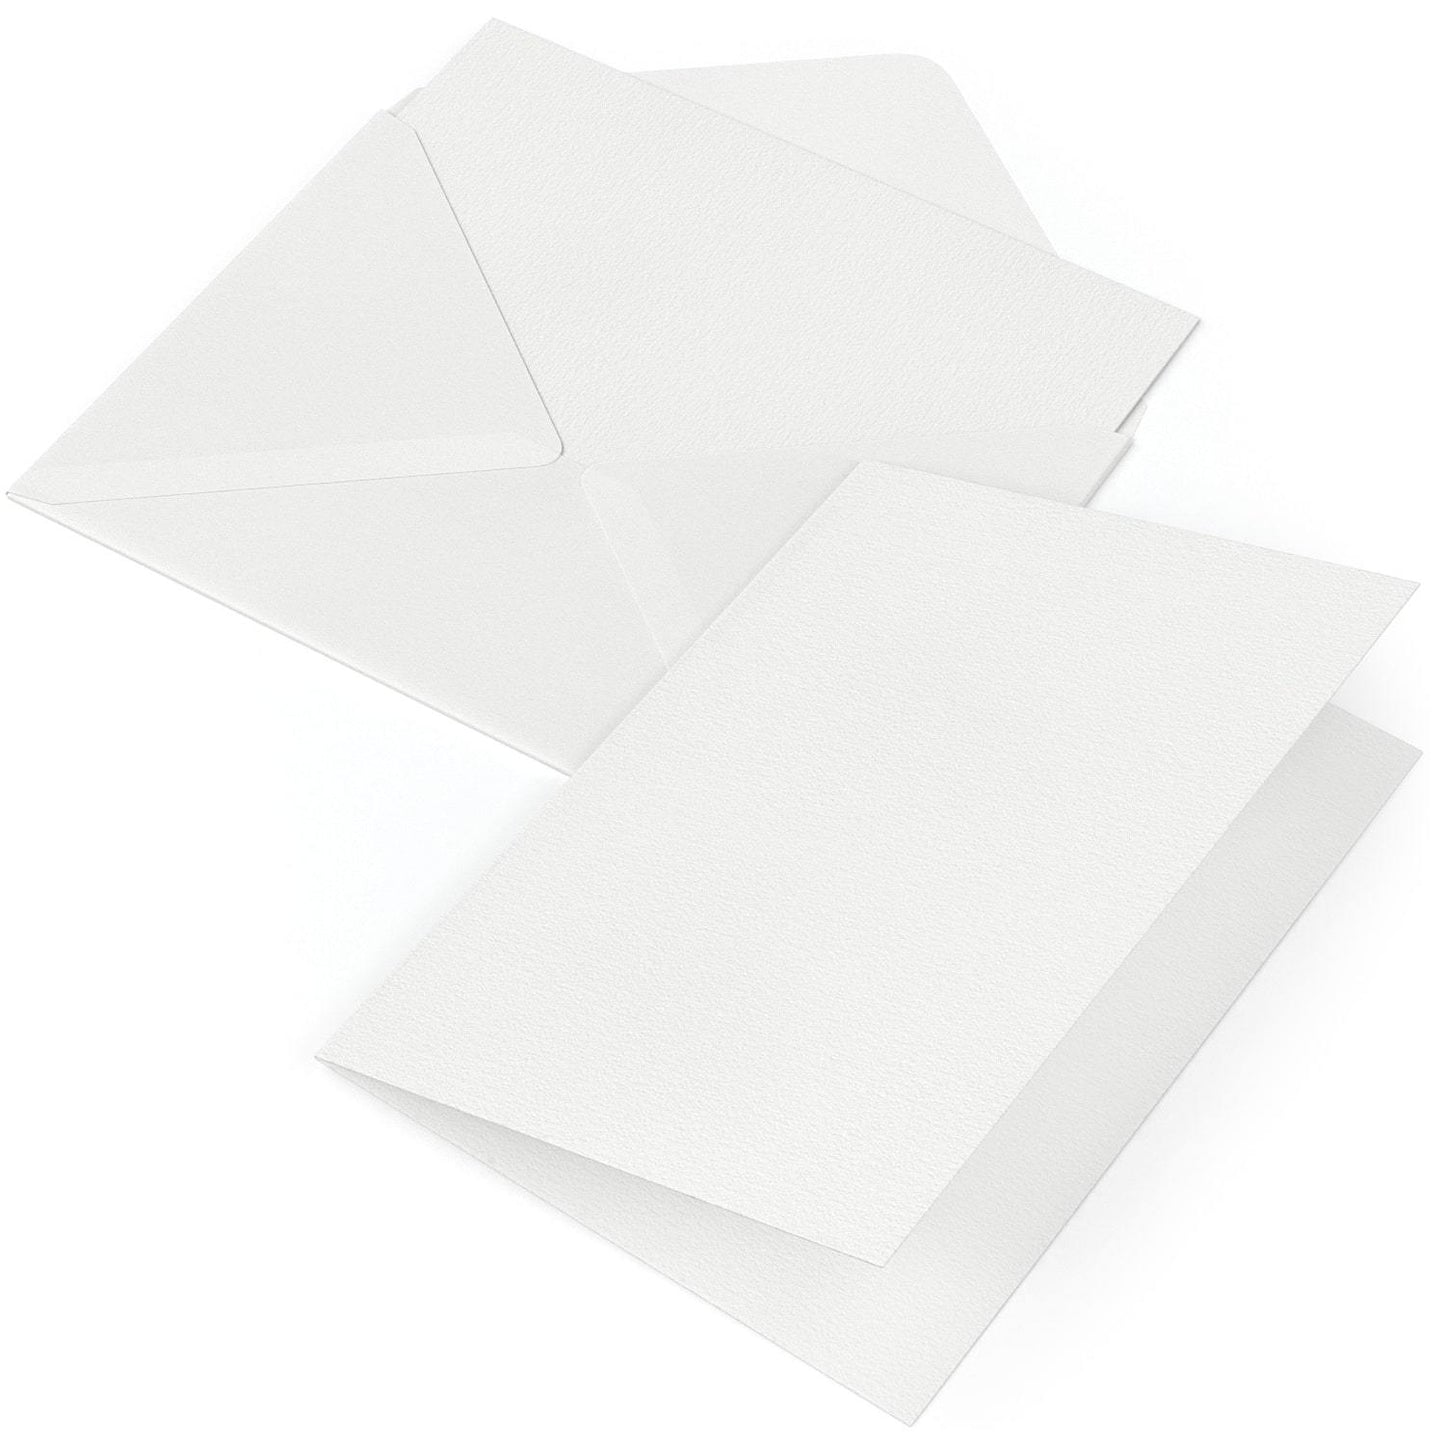 100 Sets Pure Cotton Watercolor Cards with Envelopes 5x7 Inch Foldable Size